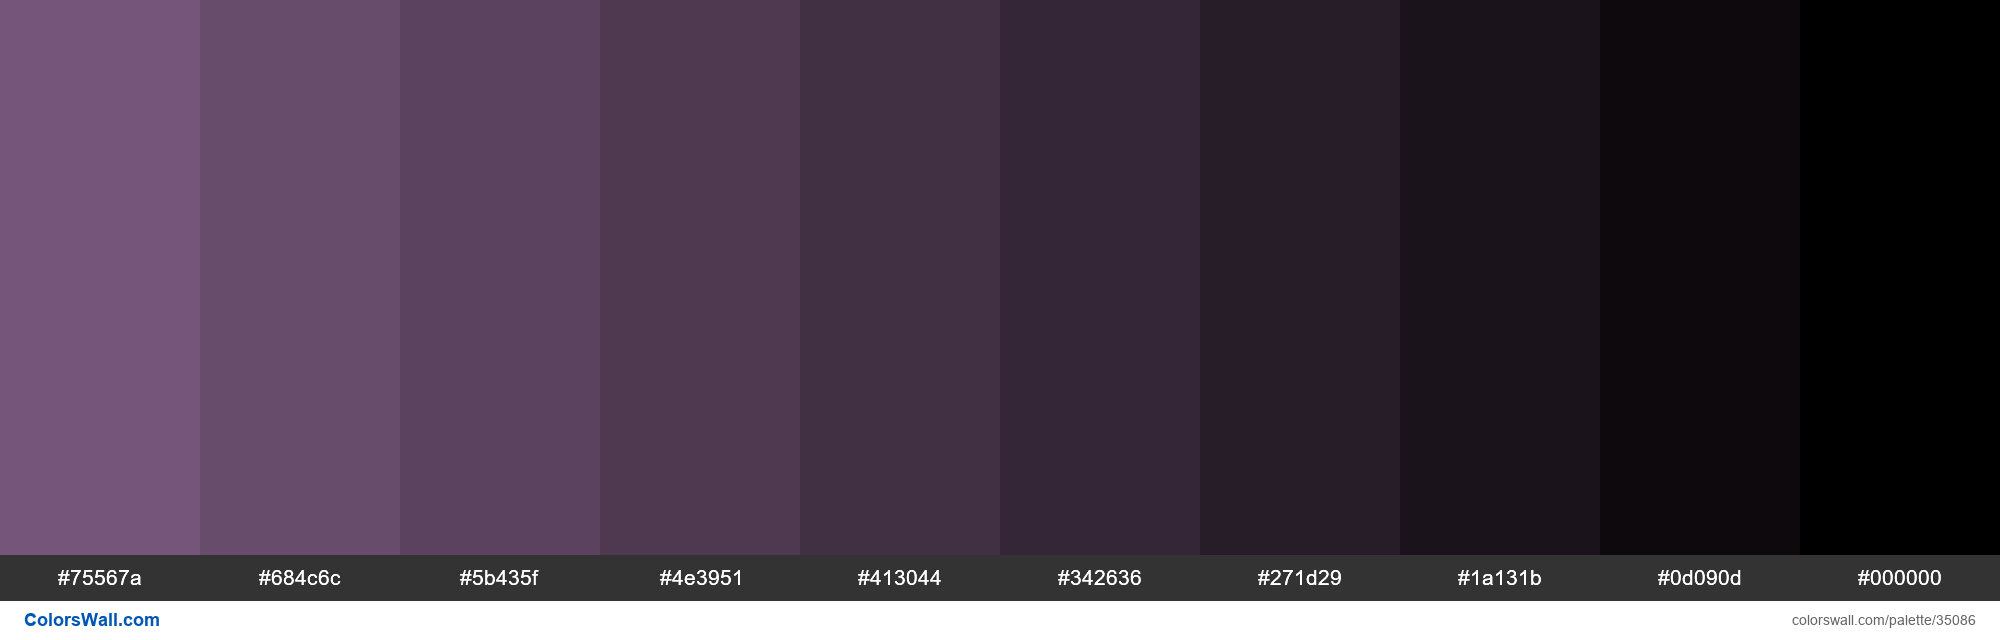 Shades XKCD Color dusty purple #825f87 hex colors palette - ColorsWall